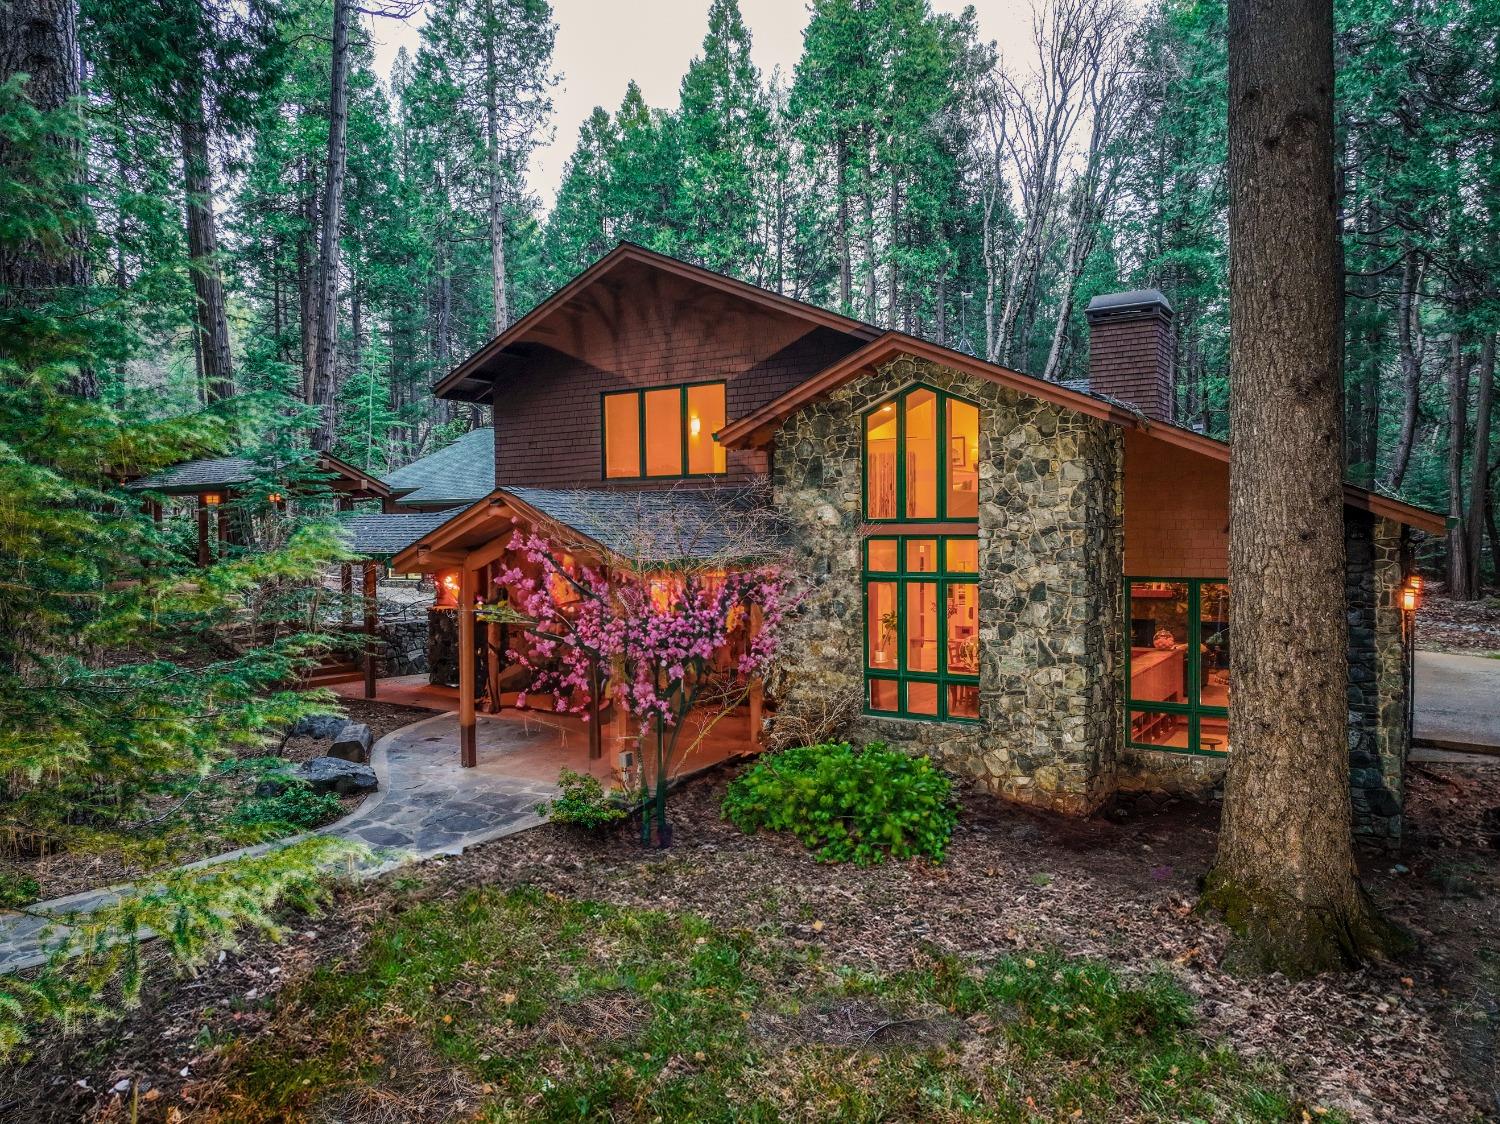 Photo of 14990 Red Dog Rd in Nevada City, CA